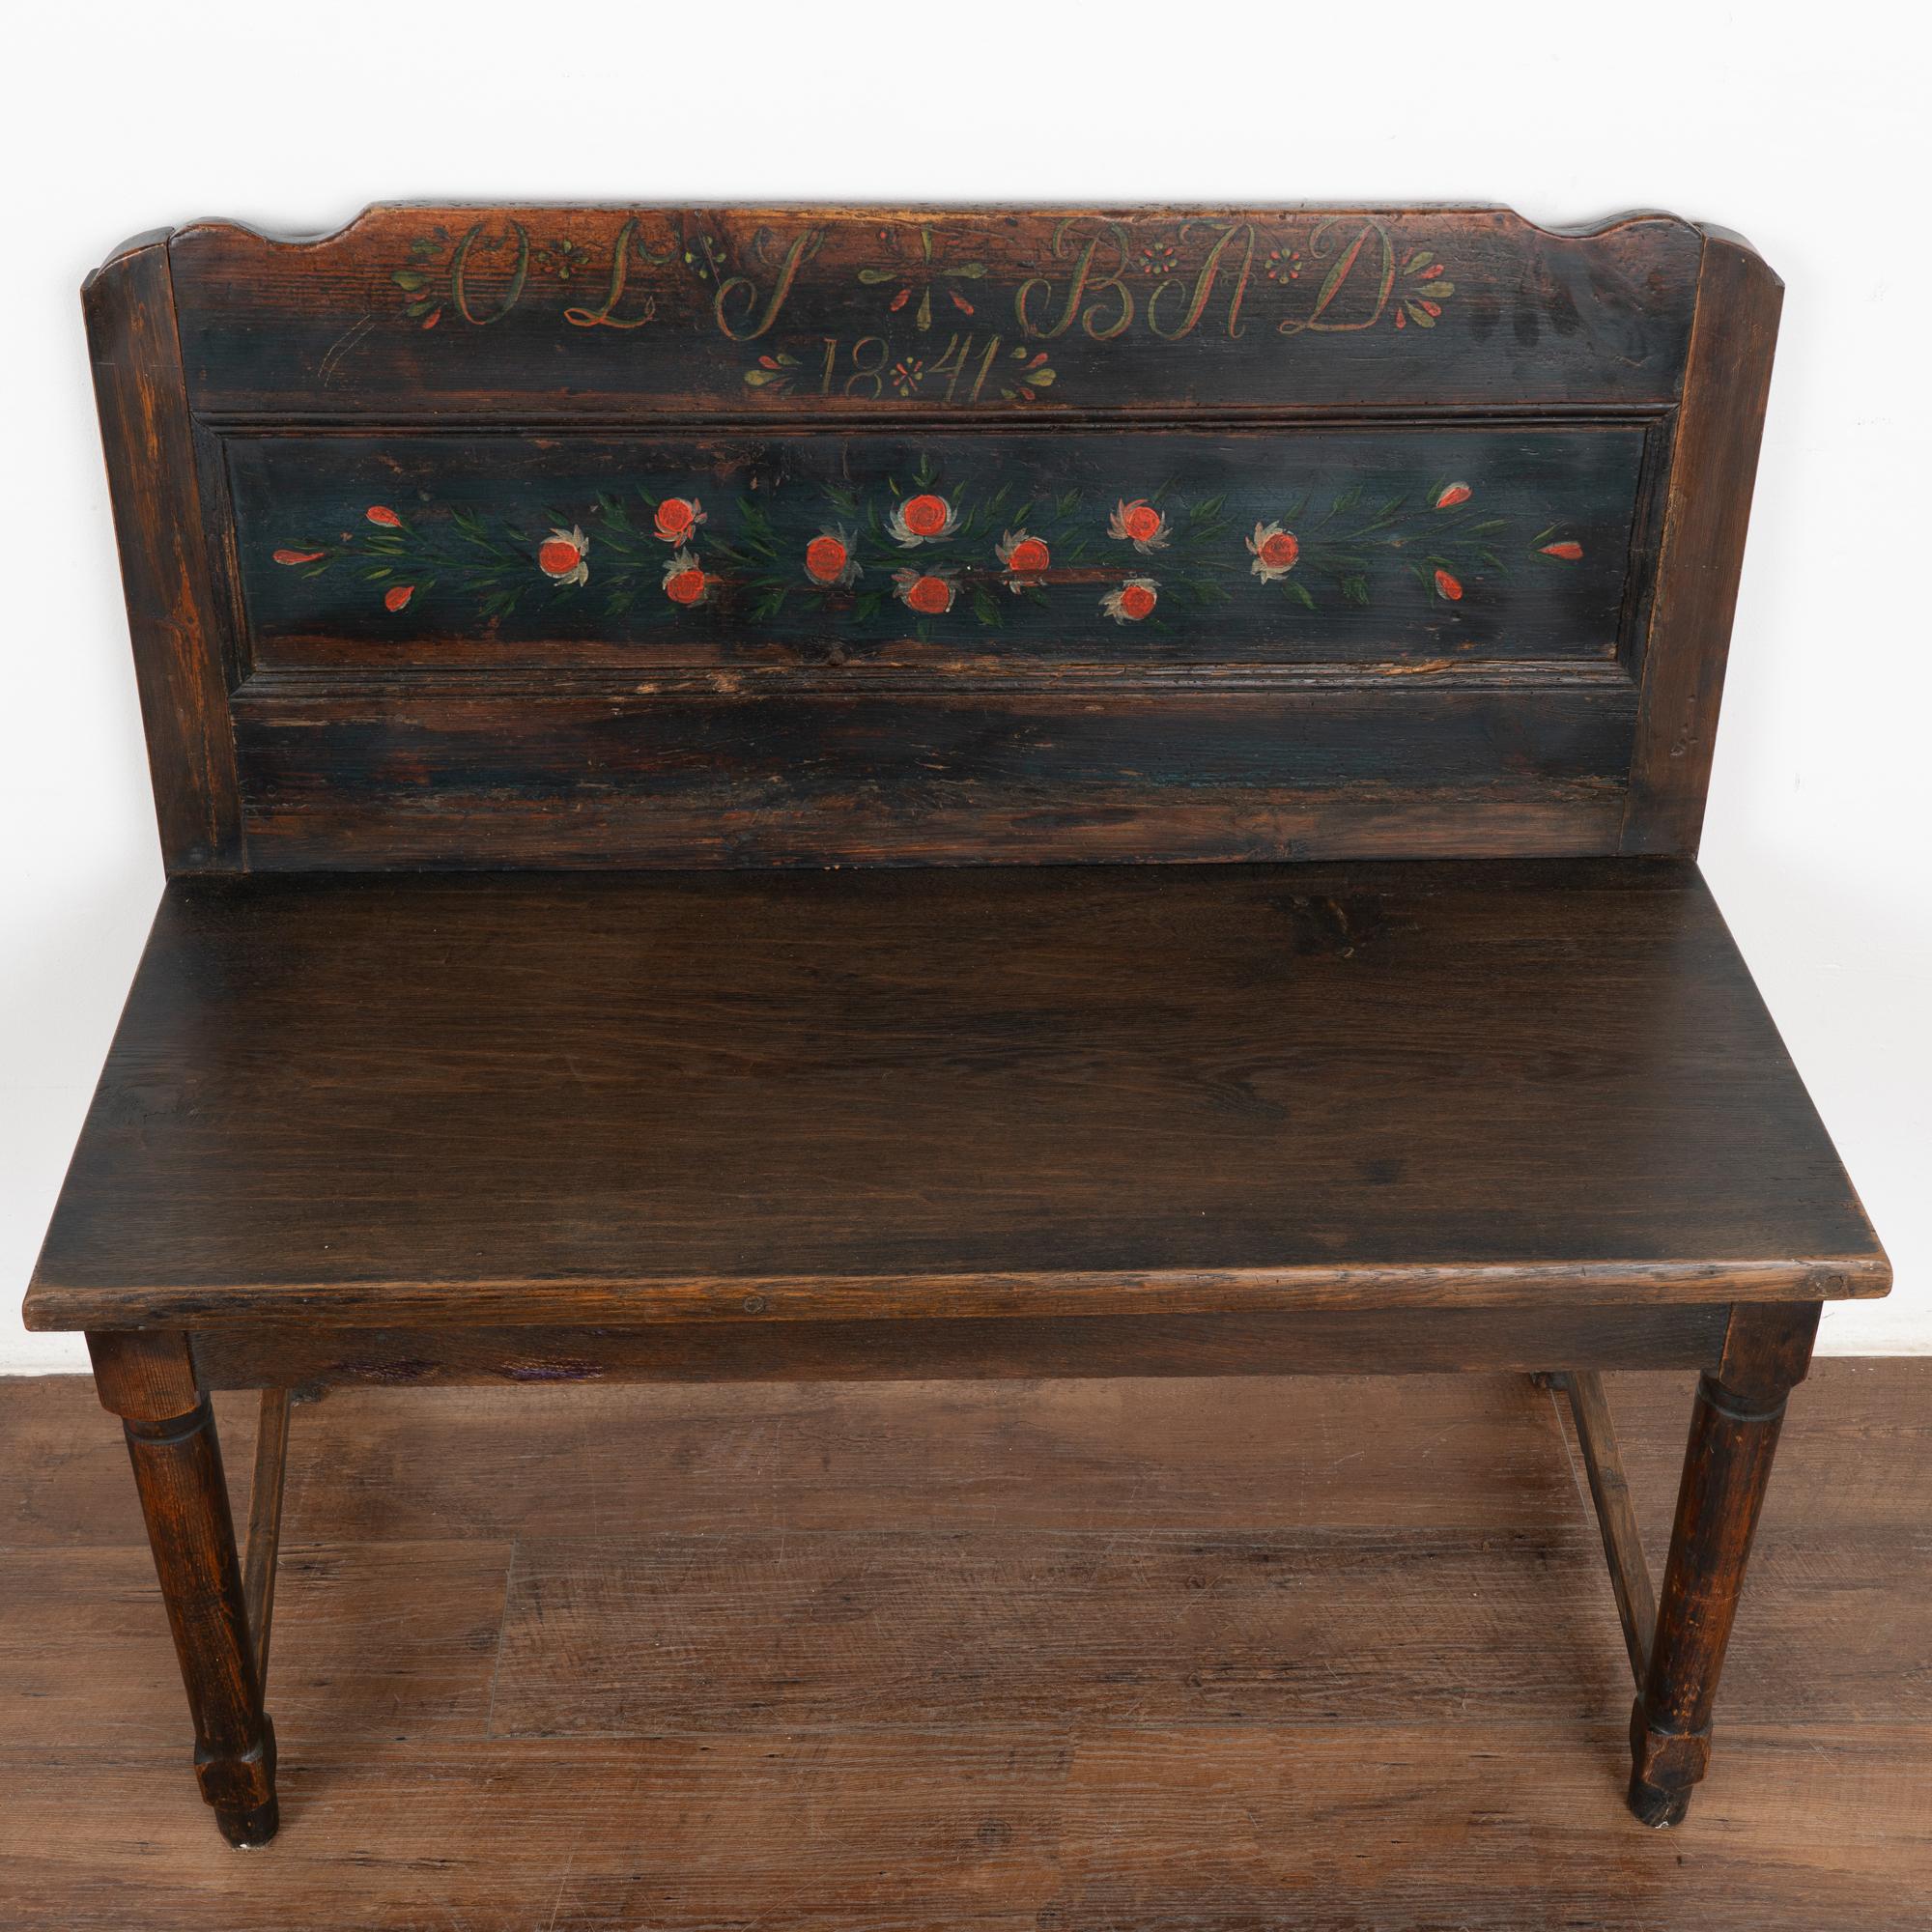 Hungarian Original Painted Small Bench, Hungary Dated 1841 For Sale